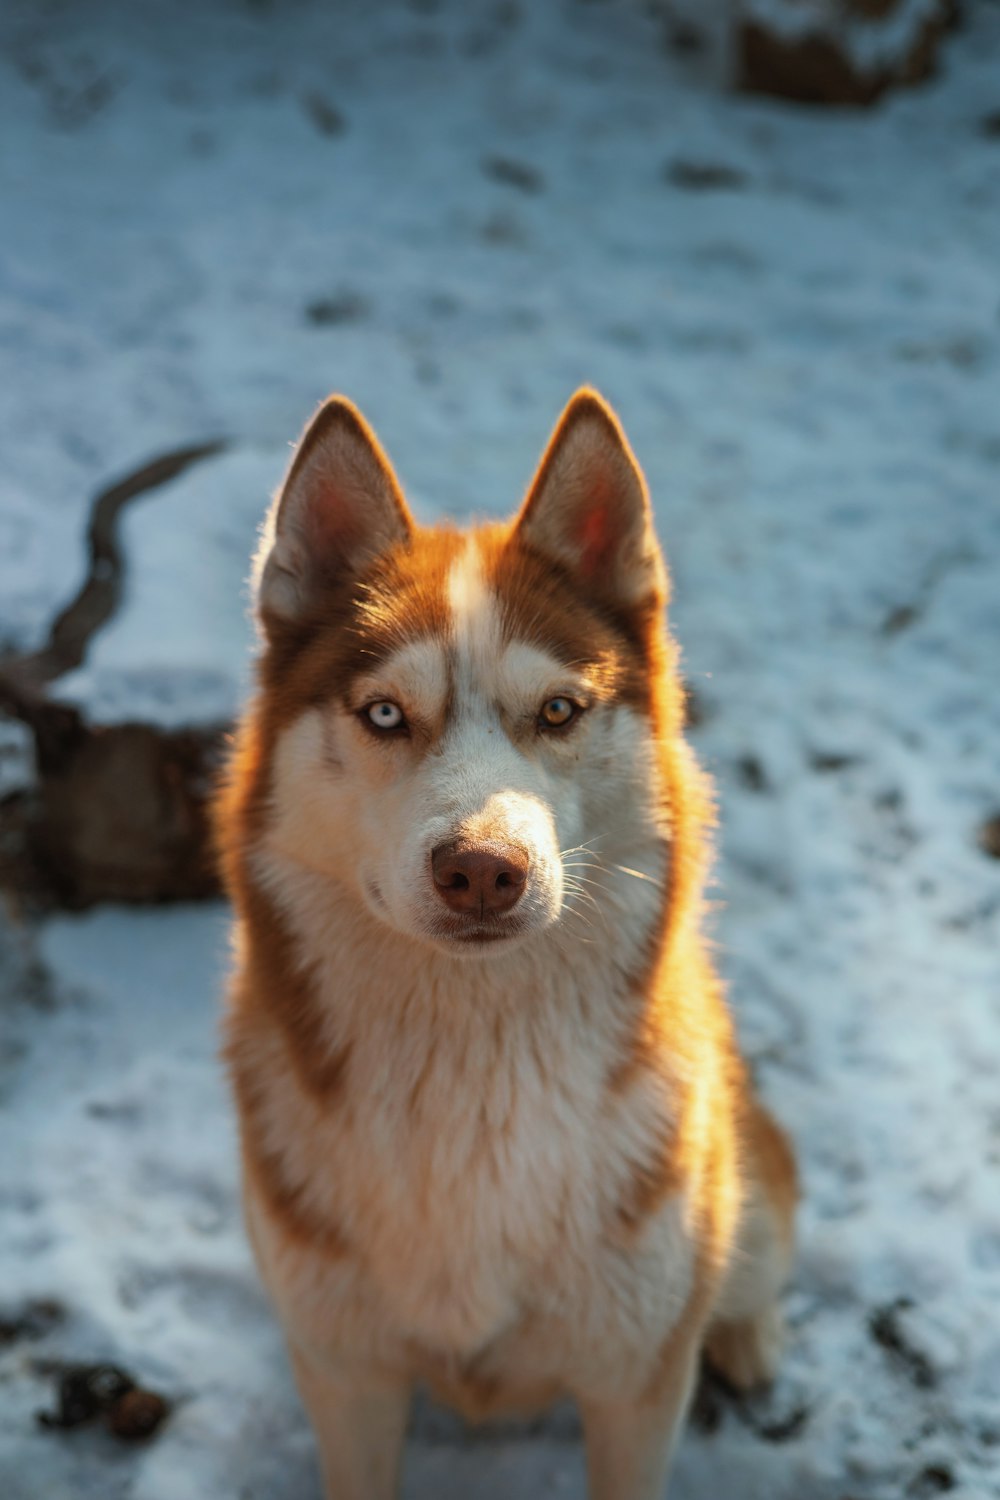 a brown and white dog standing in the snow